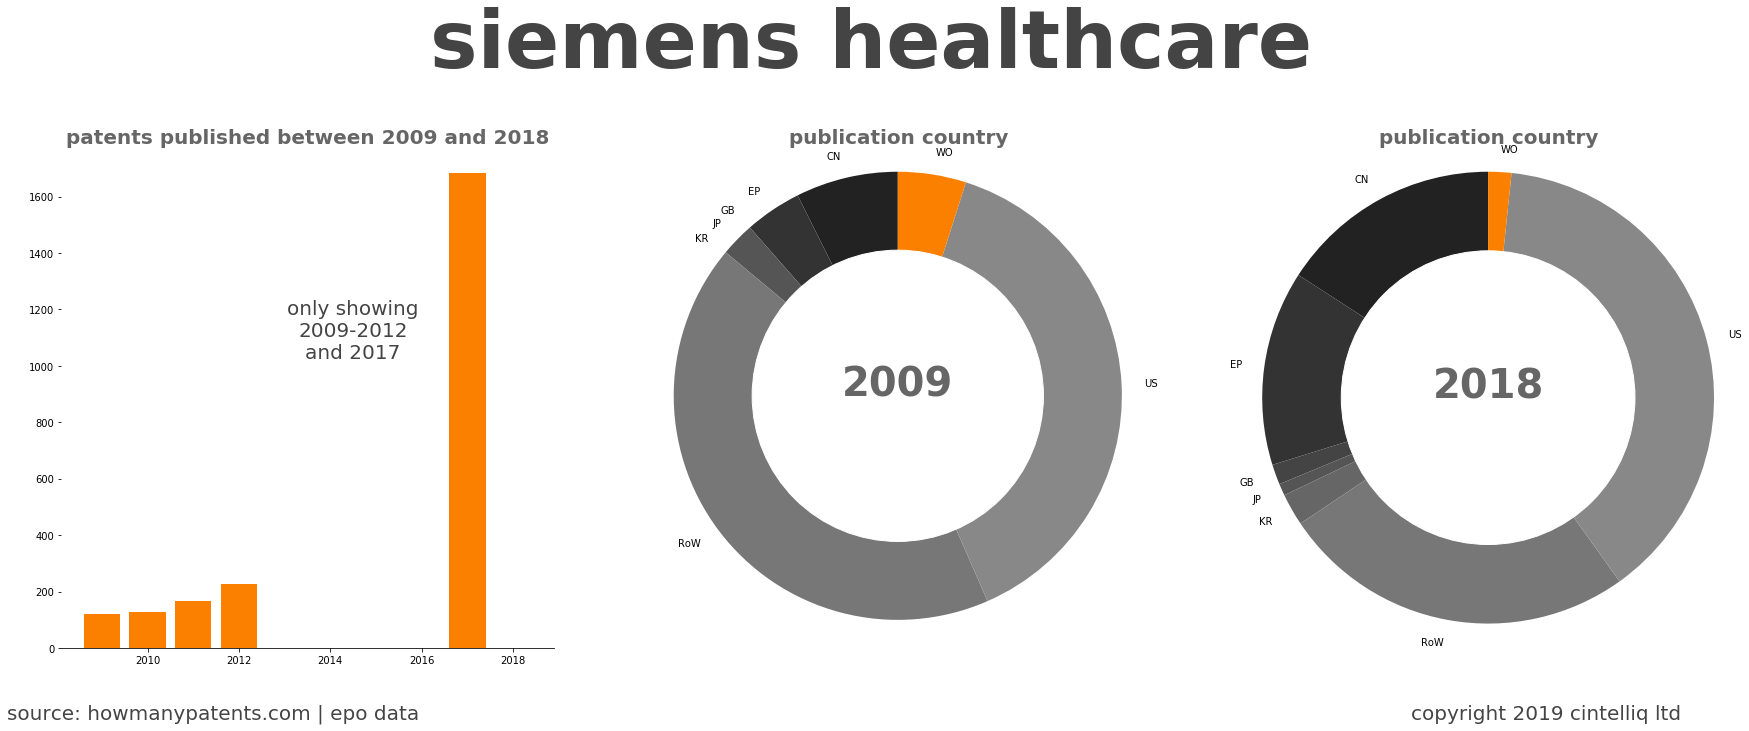 summary of patents for Siemens Healthcare